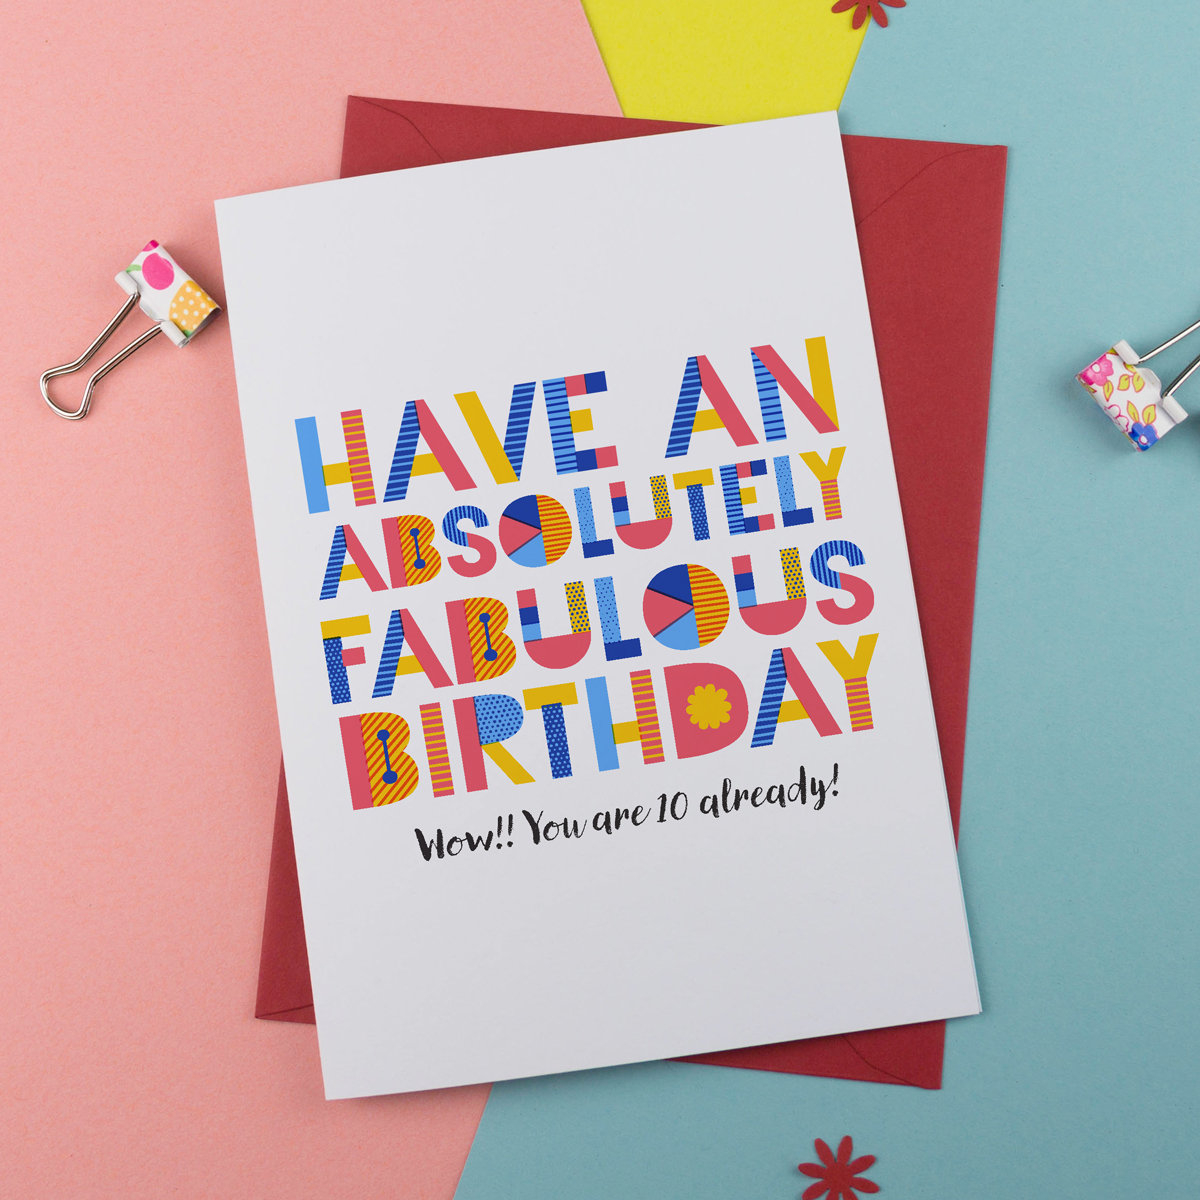 Unique Card Ideas For Birthdays Fabulous Birthday Card Fun Birthday Card Birthday Card Personalised Card Bespoke Card Colourful Card Card For Her Card For Him